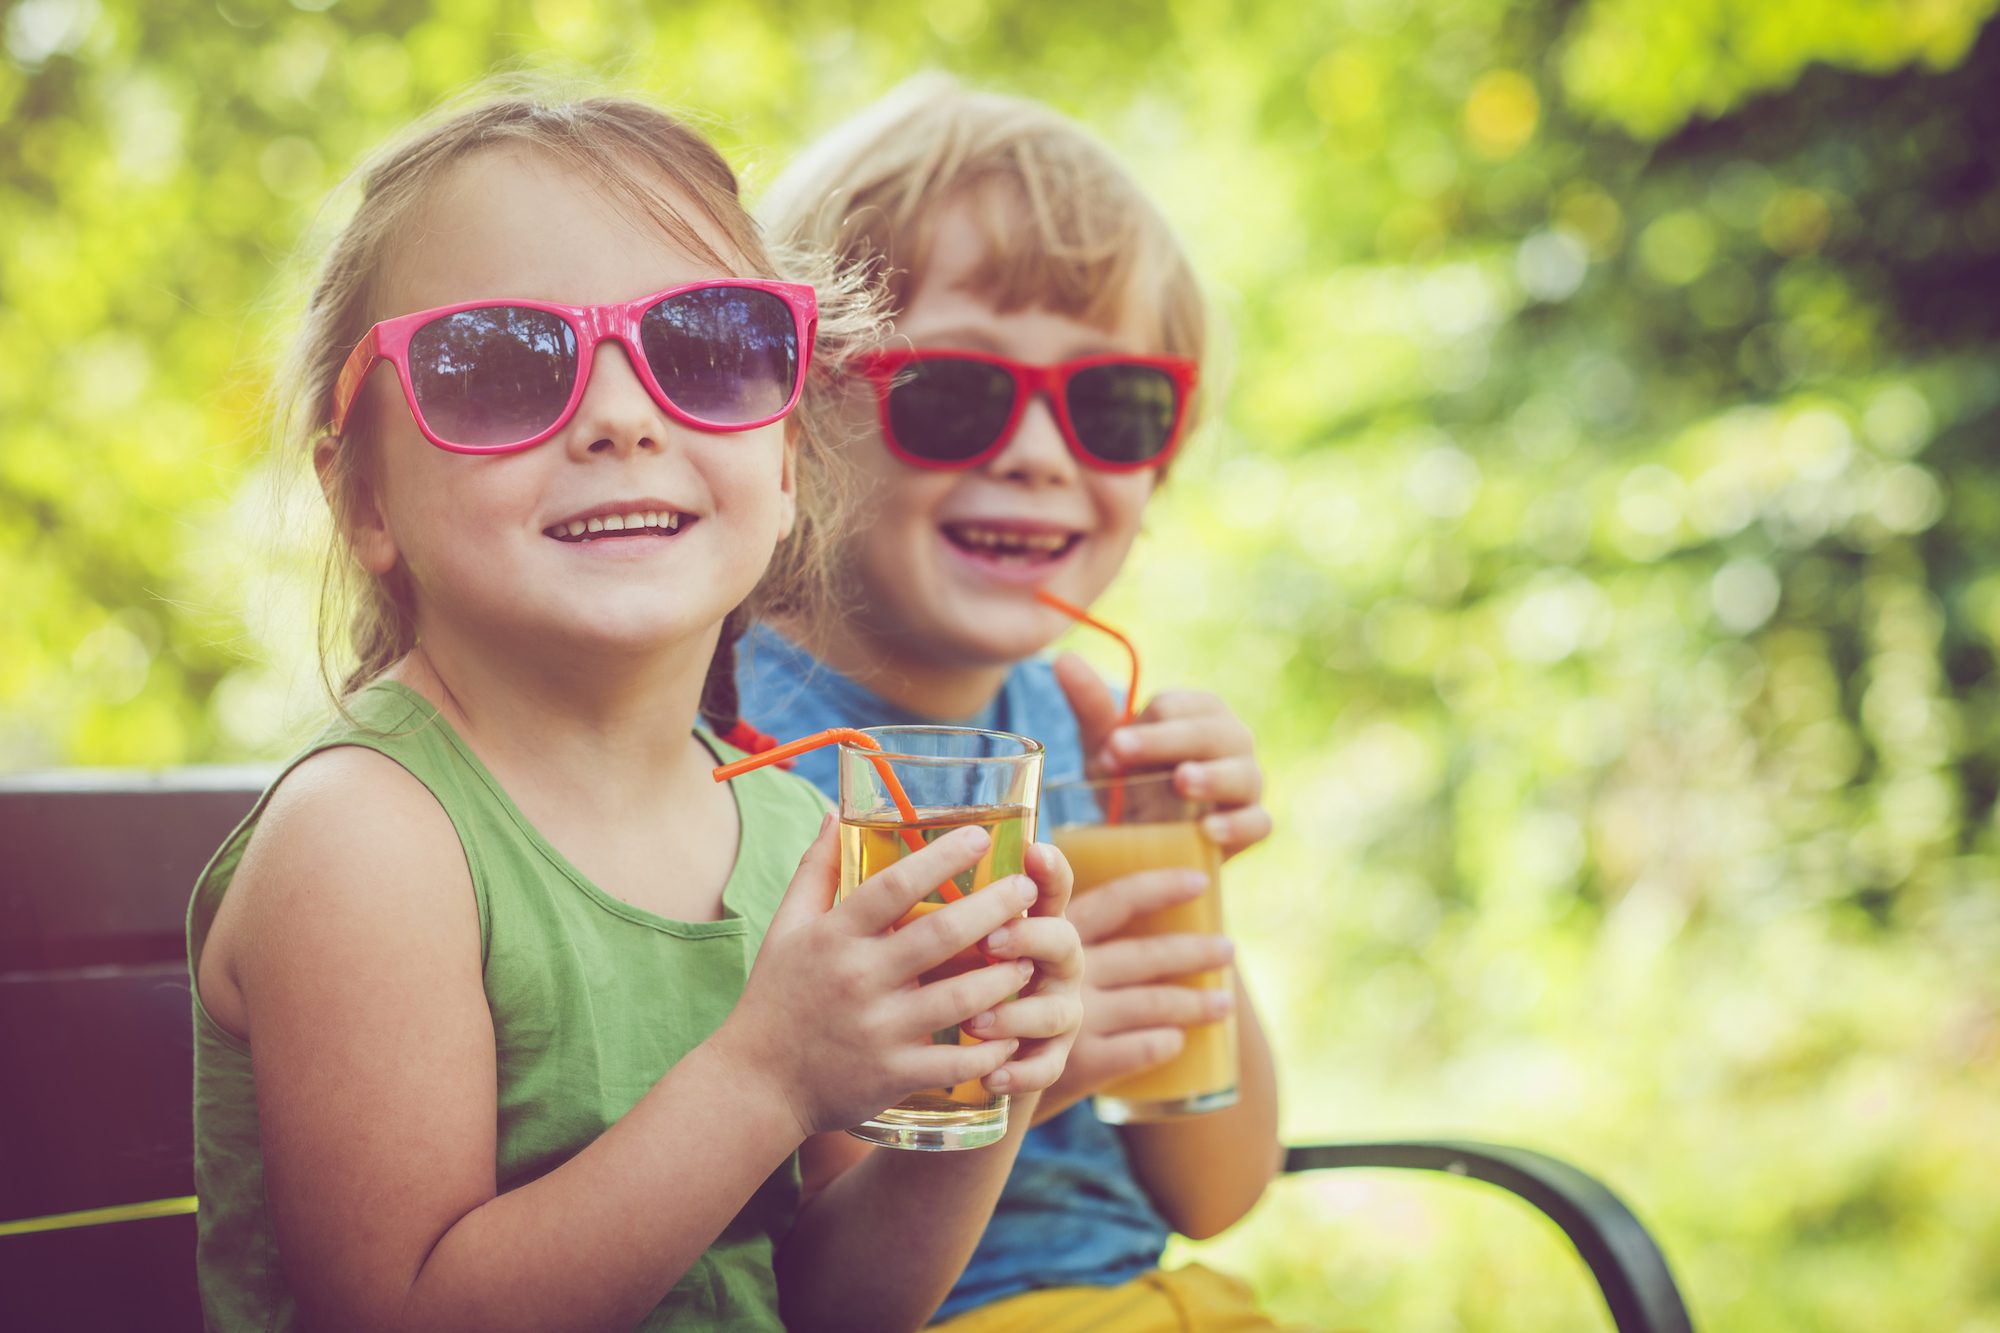 Top tips for keeping your child’s eyes sun safe